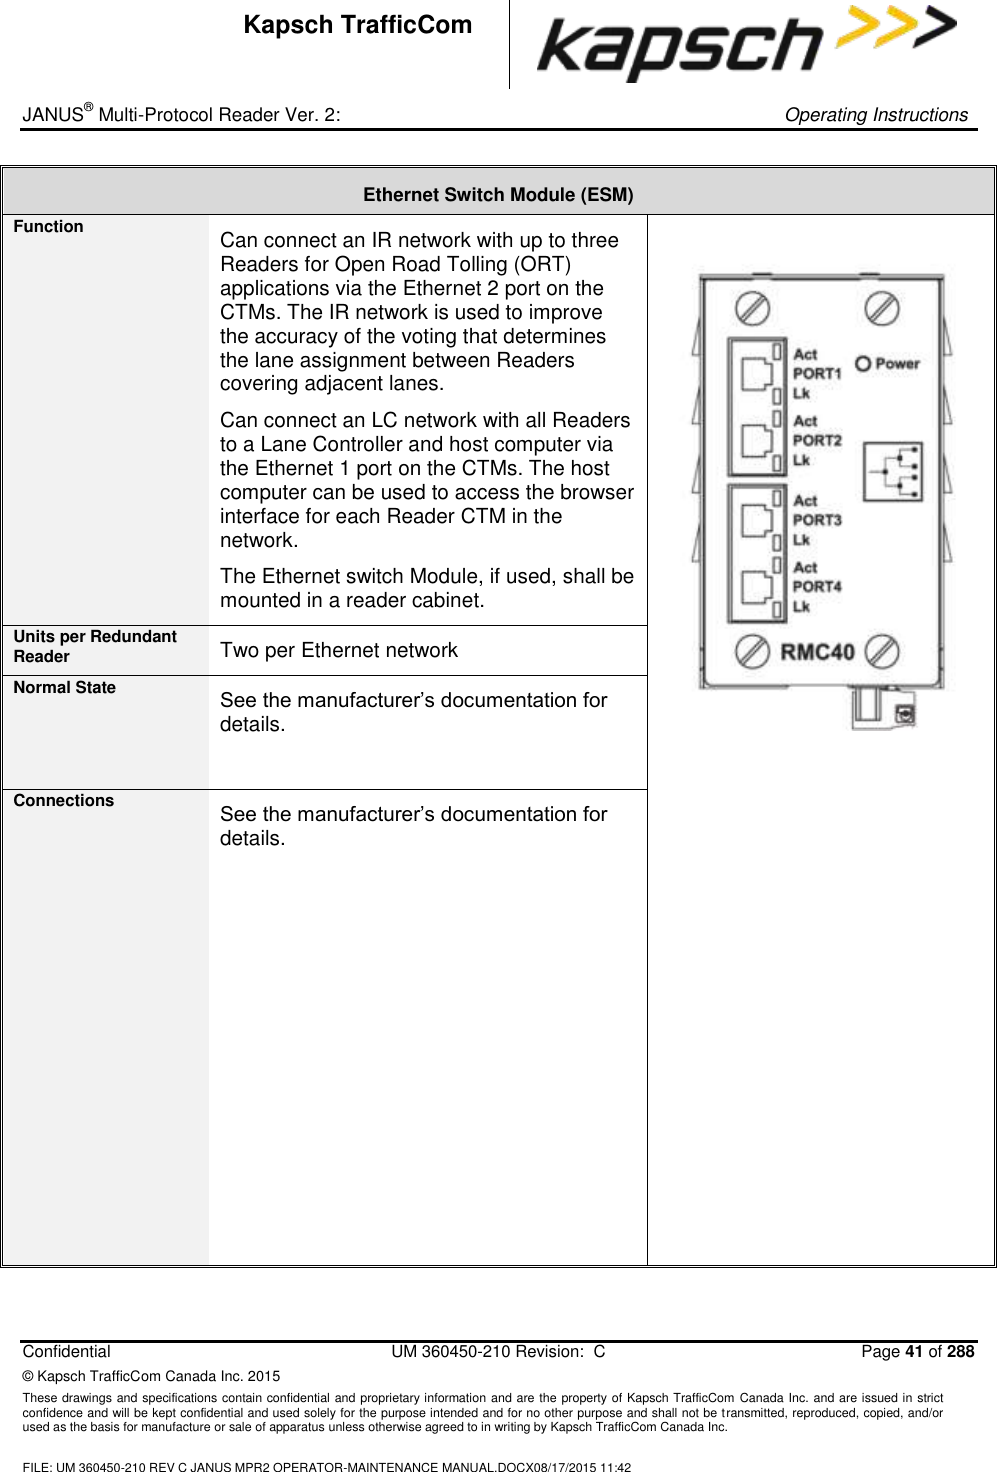 _ JANUS® Multi-Protocol Reader Ver. 2:     Operating Instructions  Confidential  UM 360450-210 Revision:  C  Page 41 of 288 © Kapsch TrafficCom Canada Inc. 2015 These drawings and specifications contain confidential and proprietary information and are the property of Kapsch TrafficCom Canada Inc. and are issued in strict confidence and will be kept confidential and used solely for the purpose intended and for no other purpose and shall not be transmitted, reproduced, copied, and/or used as the basis for manufacture or sale of apparatus unless otherwise agreed to in writing by Kapsch TrafficCom Canada Inc.  FILE: UM 360450-210 REV C JANUS MPR2 OPERATOR-MAINTENANCE MANUAL.DOCX08/17/2015 11:42  Kapsch TrafficCom Ethernet Switch Module (ESM) Function Can connect an IR network with up to three Readers for Open Road Tolling (ORT) applications via the Ethernet 2 port on the CTMs. The IR network is used to improve the accuracy of the voting that determines the lane assignment between Readers covering adjacent lanes.  Can connect an LC network with all Readers to a Lane Controller and host computer via the Ethernet 1 port on the CTMs. The host computer can be used to access the browser interface for each Reader CTM in the network. The Ethernet switch Module, if used, shall be mounted in a reader cabinet.  Units per Redundant Reader Two per Ethernet network Normal State See the manufacturer’s documentation for details. Connections See the manufacturer’s documentation for details.  